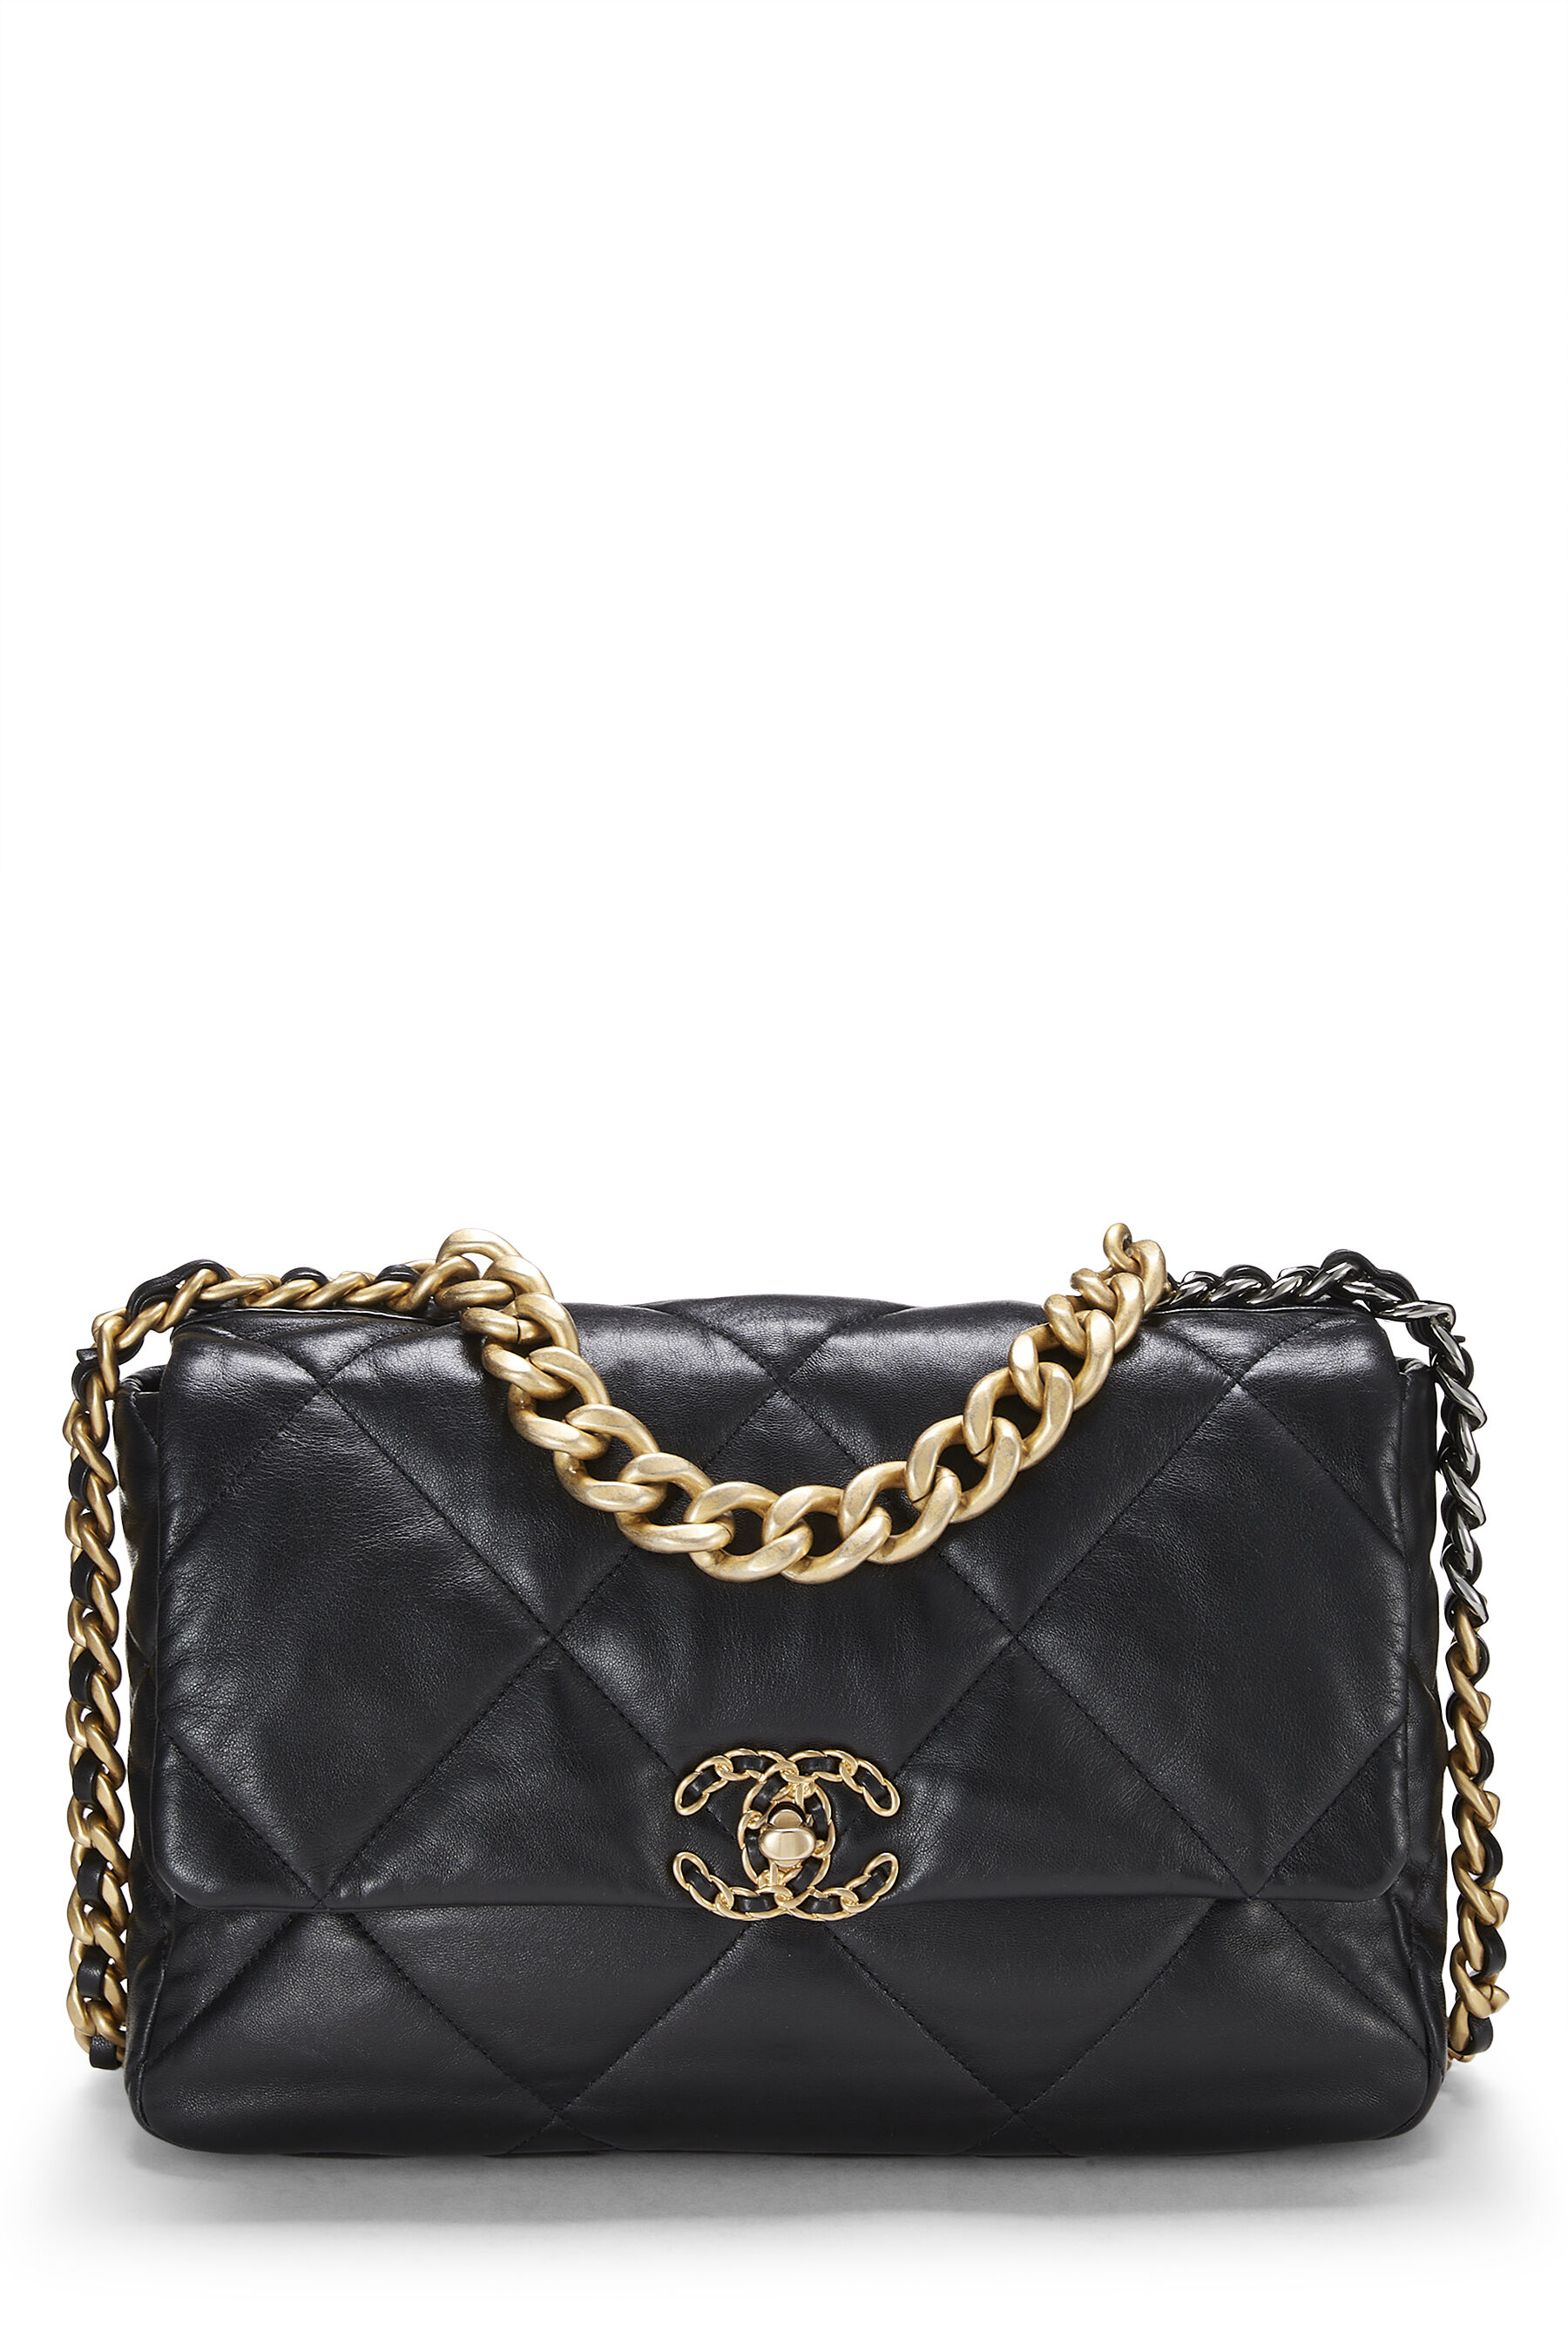 Black Quilted Lambskin Chanel 19 Flap Bag Large